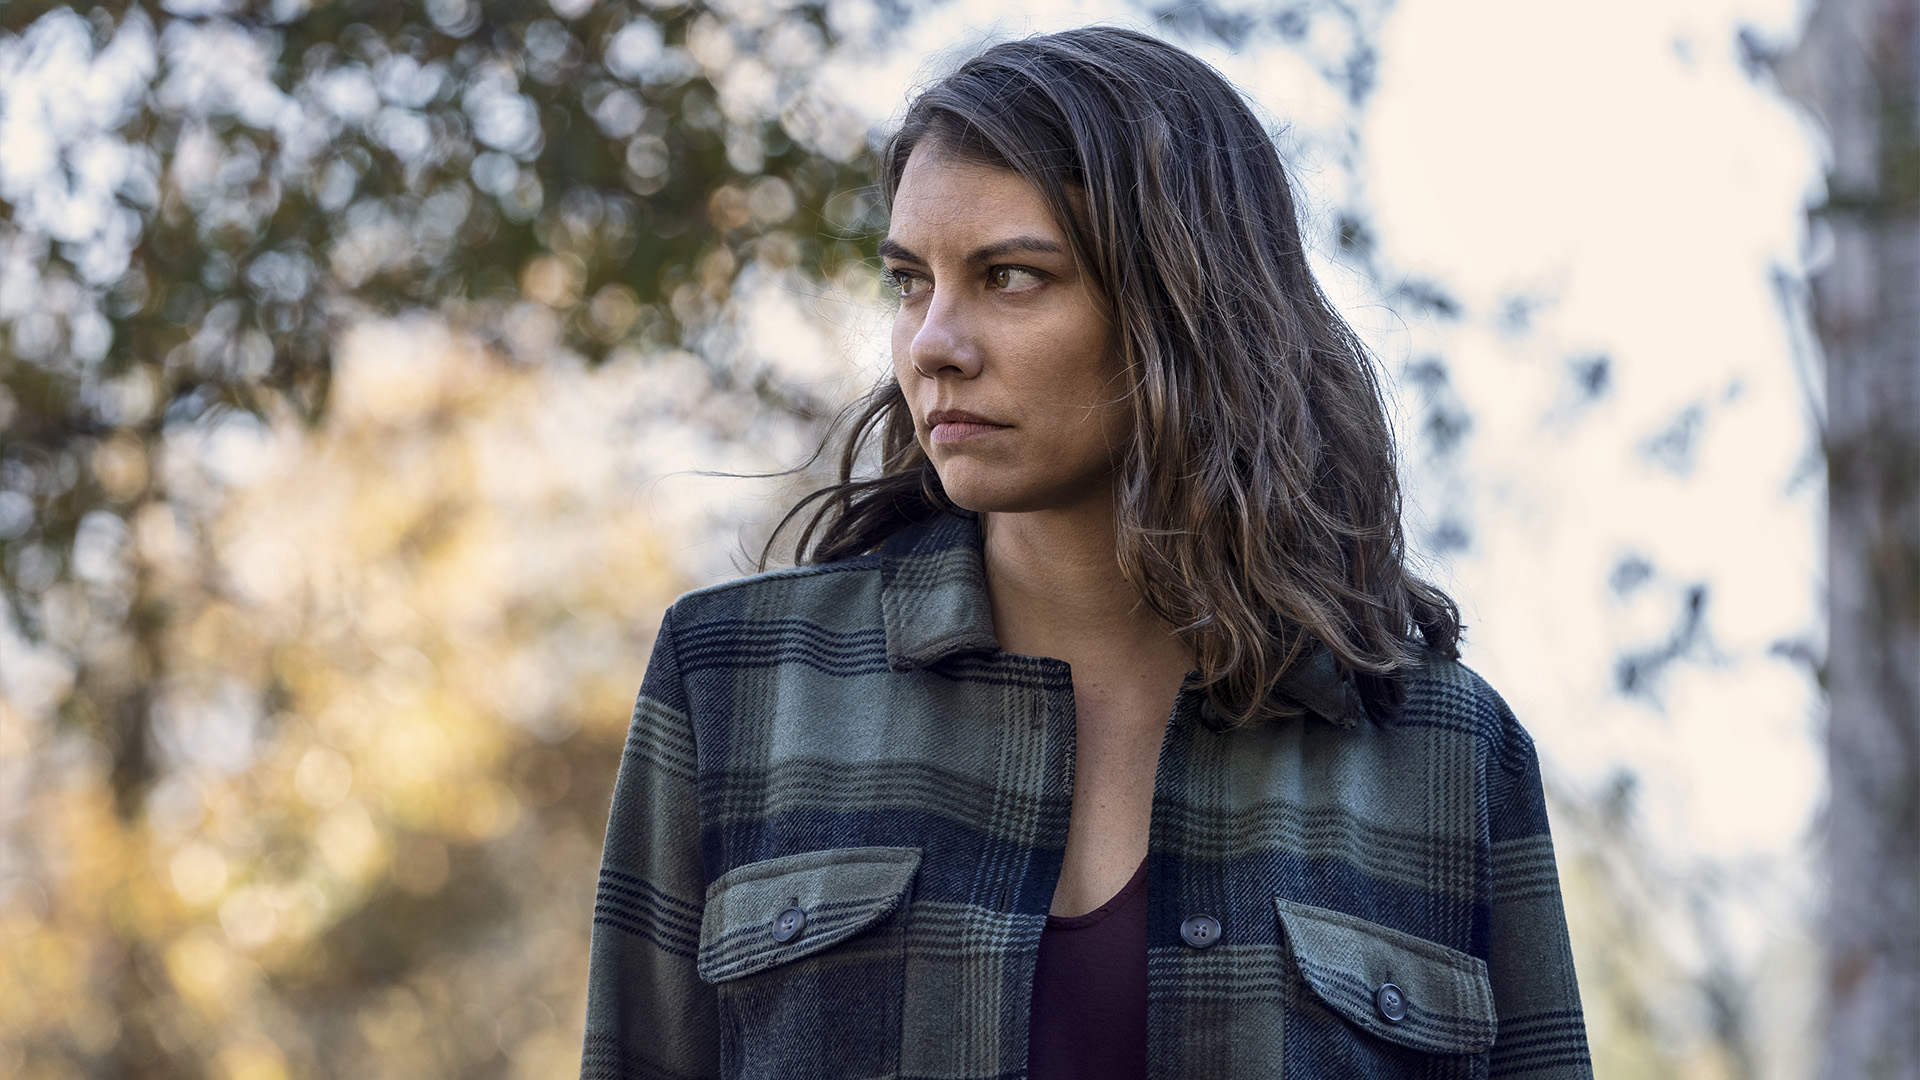 Maggie's Story, The story of Maggie Rhee, as told by Lauren Cohan. , TV-MA, Season 1010555, Episode 2